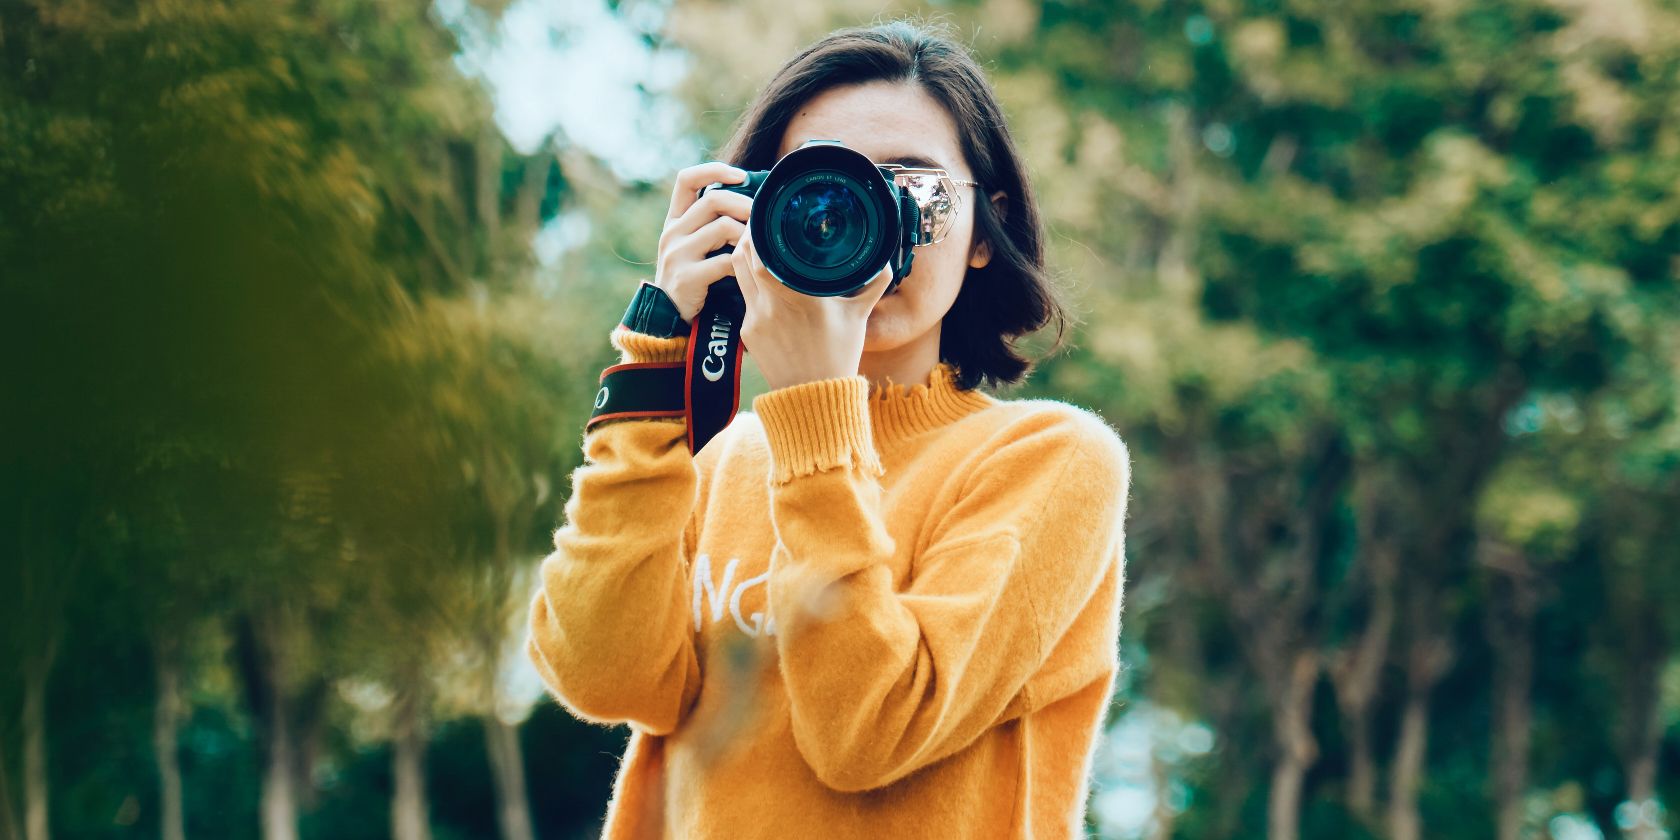 photo of a woman taking photos on a camera